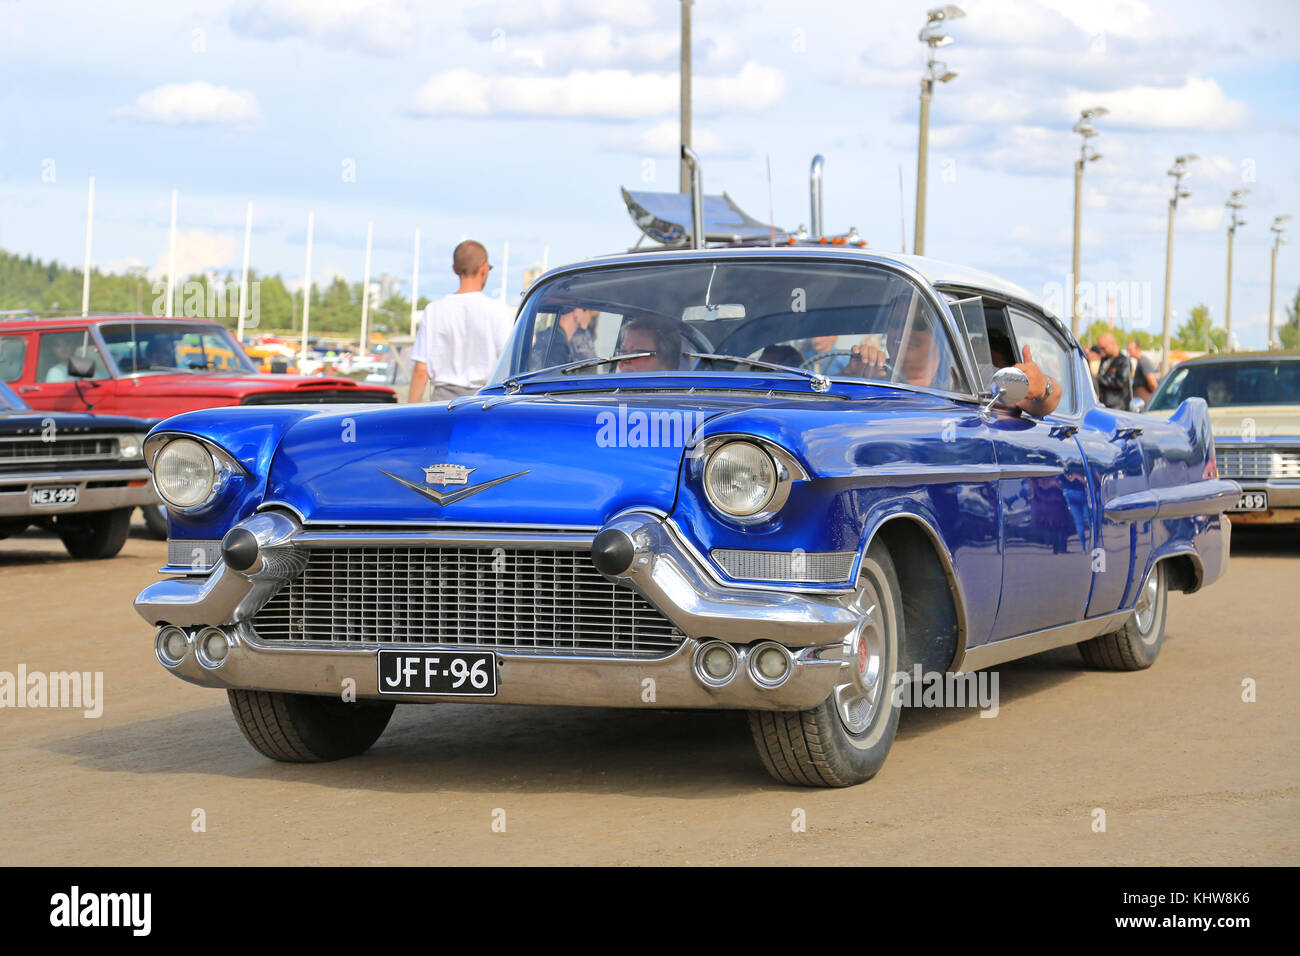 FORSSA, FINLAND - AUGUST 2, 2015: Classic blue Cadillac 4D Sedan Series 62 at Pick-Nick Car Show in Forssa, Finland. Stock Photo